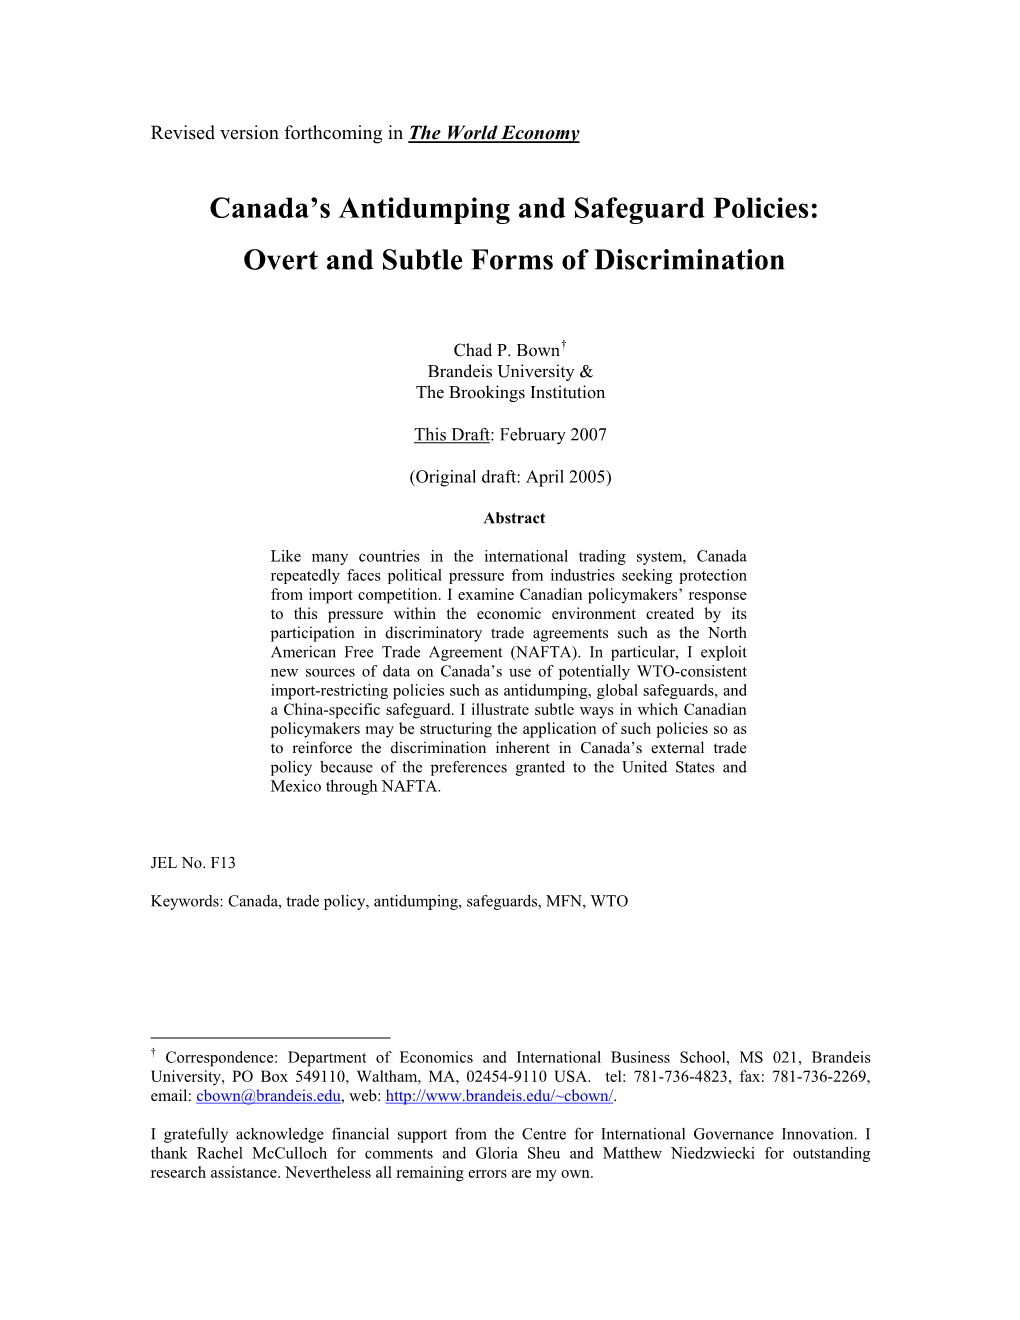 Canada's Antidumping and Safeguard Policies: Overt and Subtle Forms Of